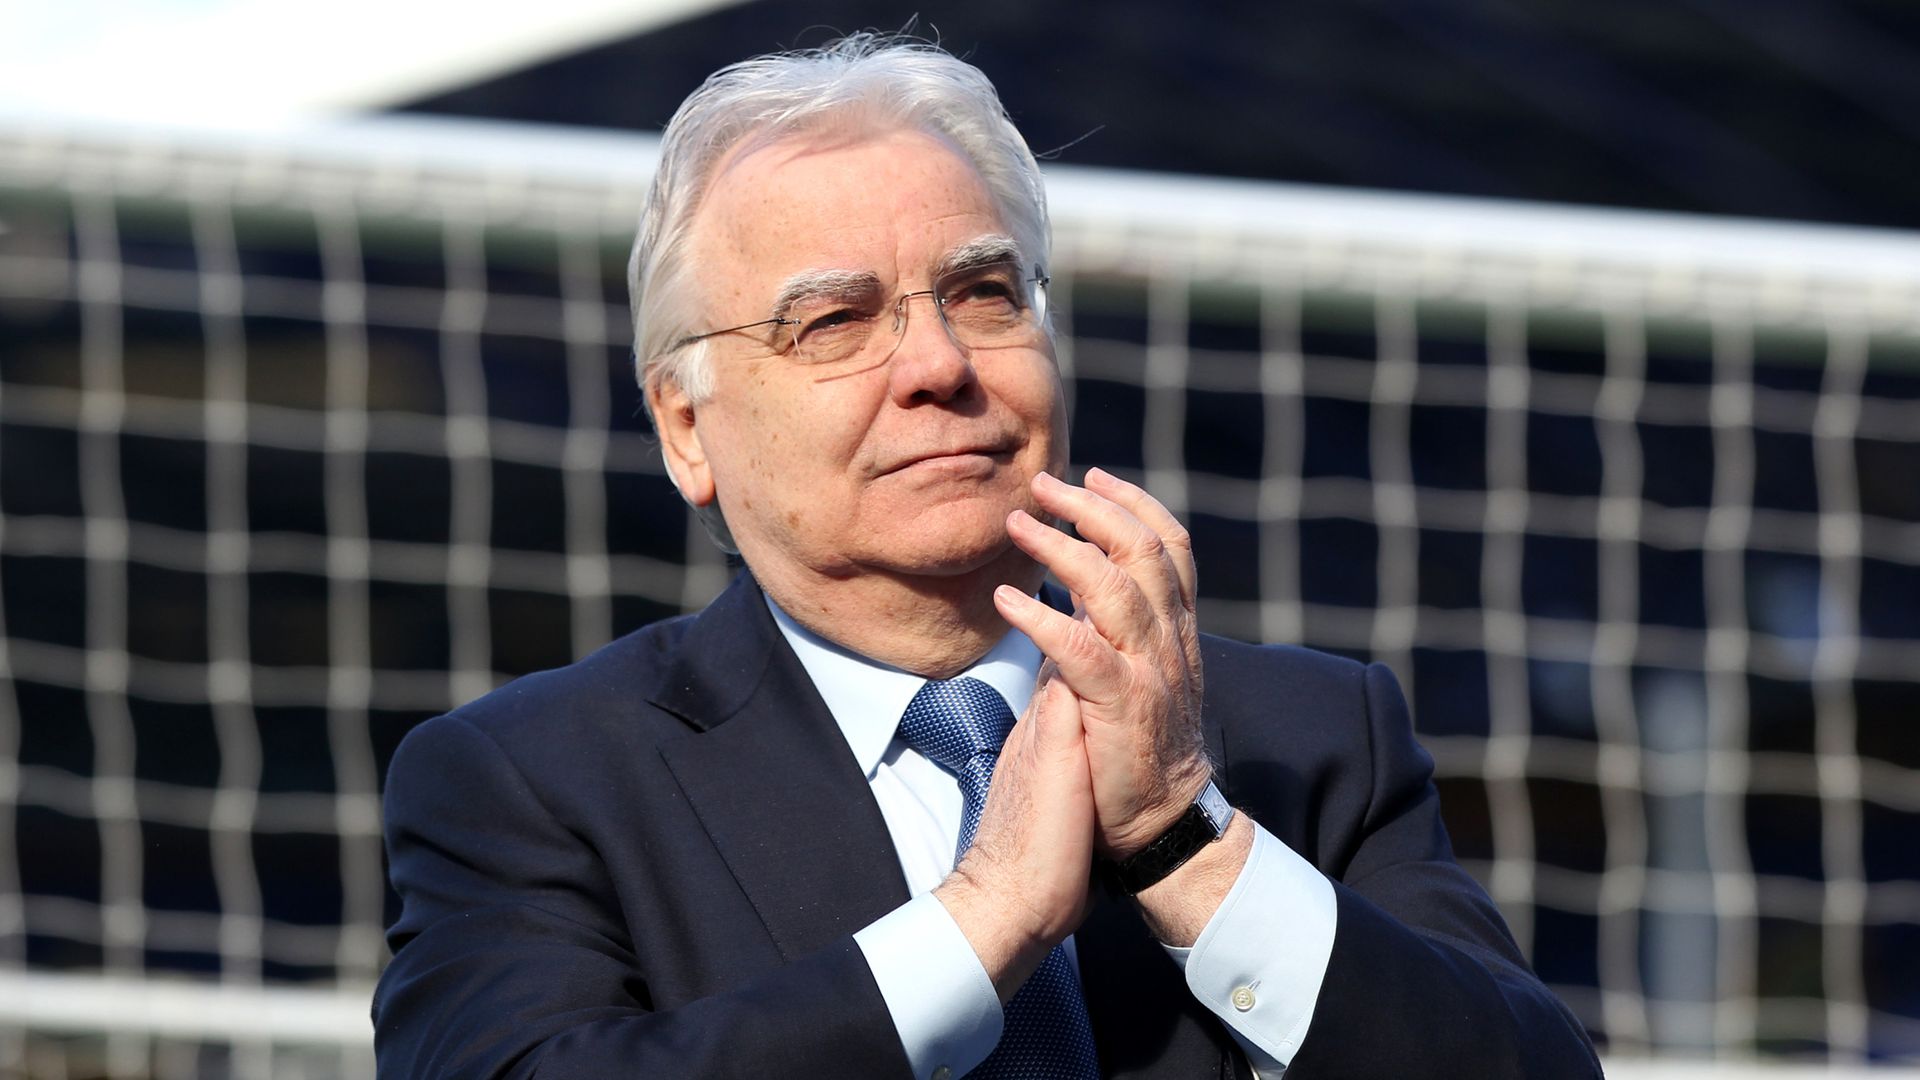 Kenwright gave his all to Everton and fought until end to fix the club